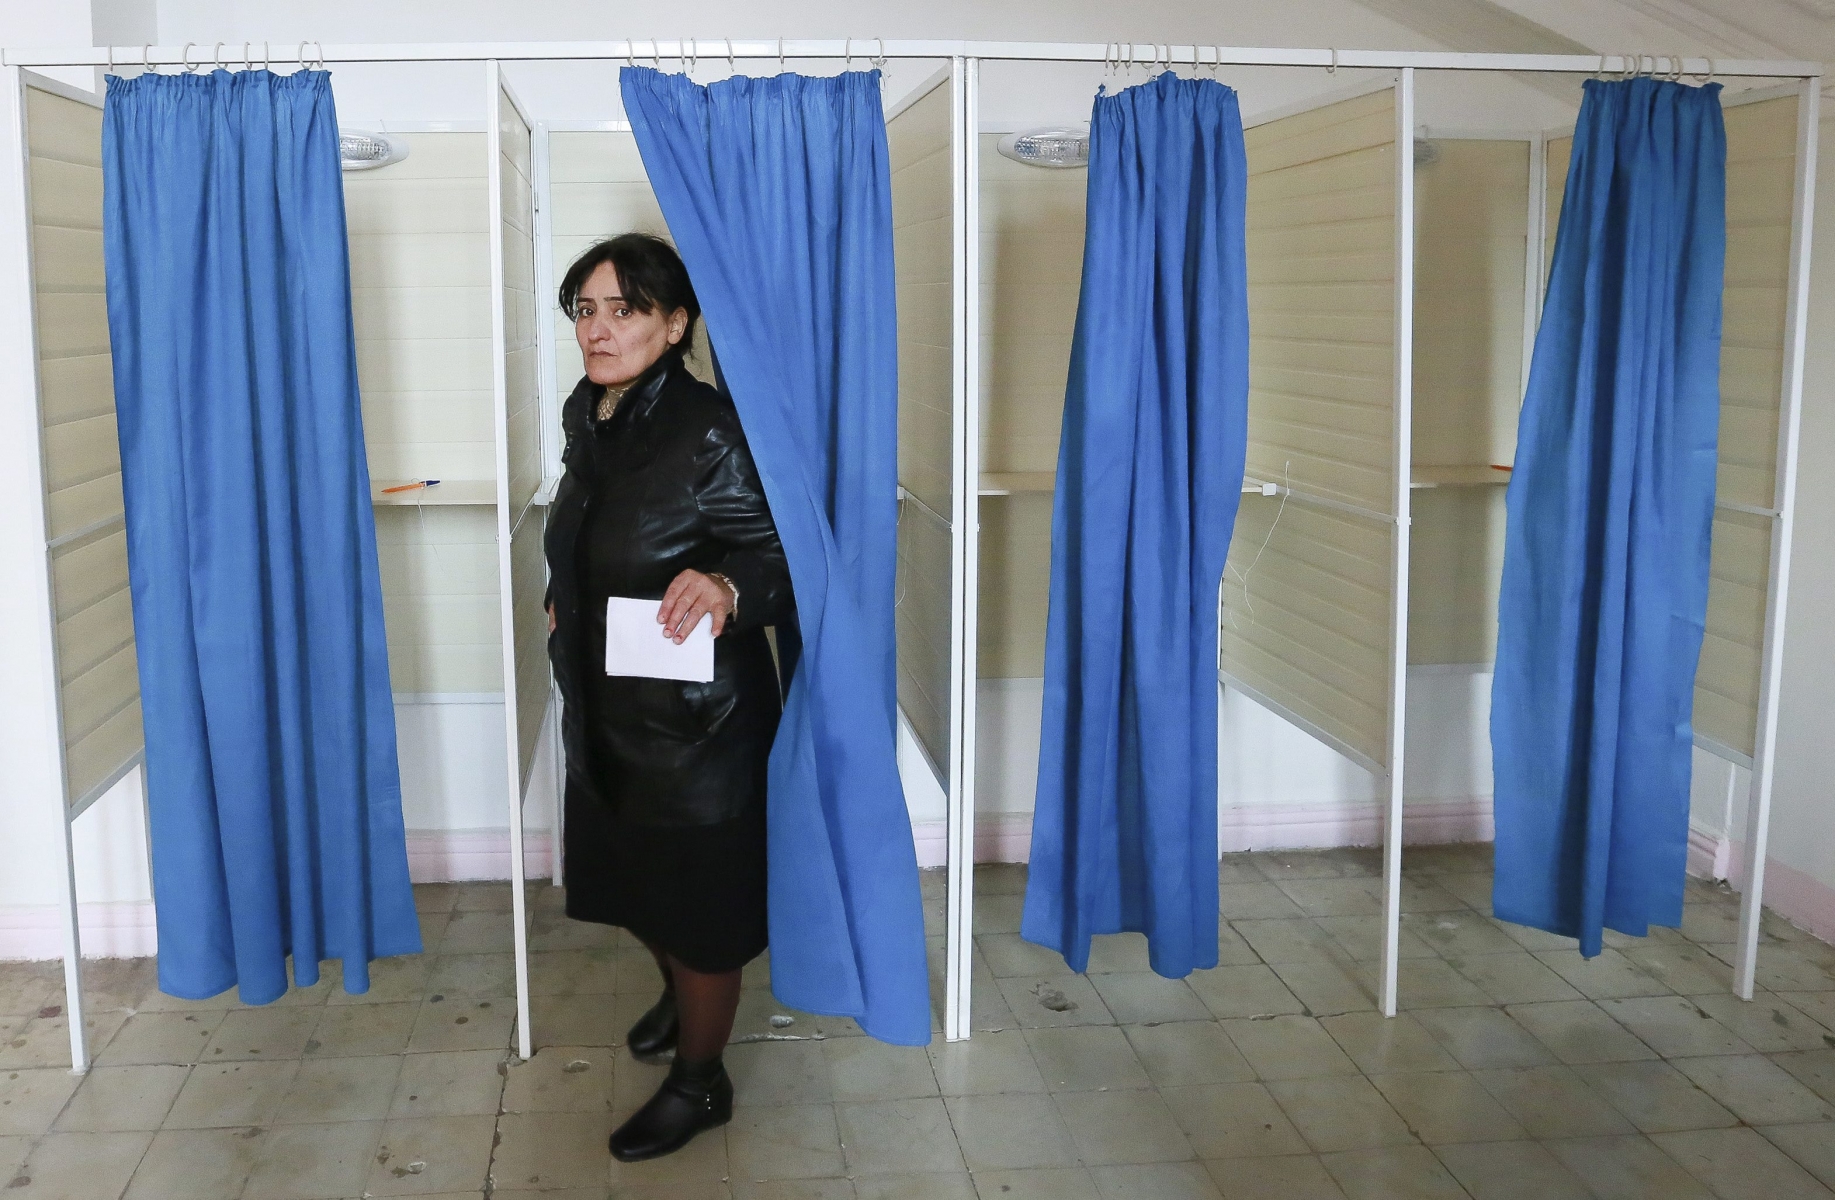 A woman leaves a voting cabin to cast her ballot at a polling station during a parliamentary elections in Baku, Azerbaijan, Sunday, Nov. 1, 2015. Azerbaijani citizens are going to the polls to elect the 125 members of parliament. Voters in the oil-rich Caspian Sea nation of Azerbaijan are casting ballots in a parliamentary election expected to secure the ruling partys dominance. (AP Photo/Aziz Karimov)